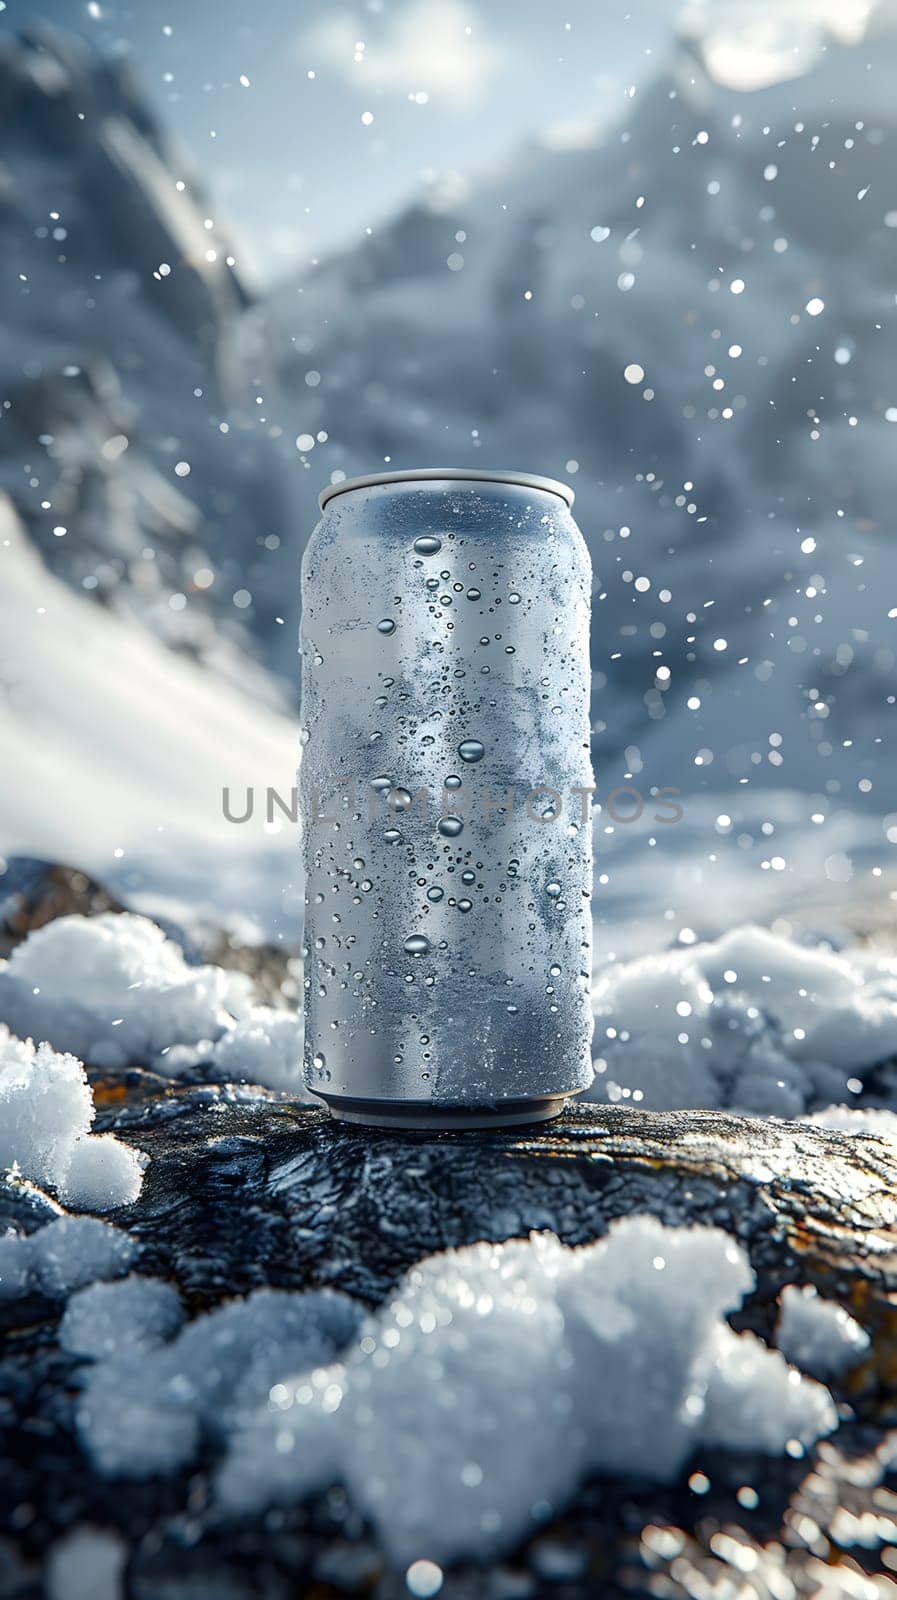 A can of soda is resting on a rock in the freezing snow, with liquid inside slowly melting as it turns from a cold fluid into gas, a geological phenomenon in the glacial landform